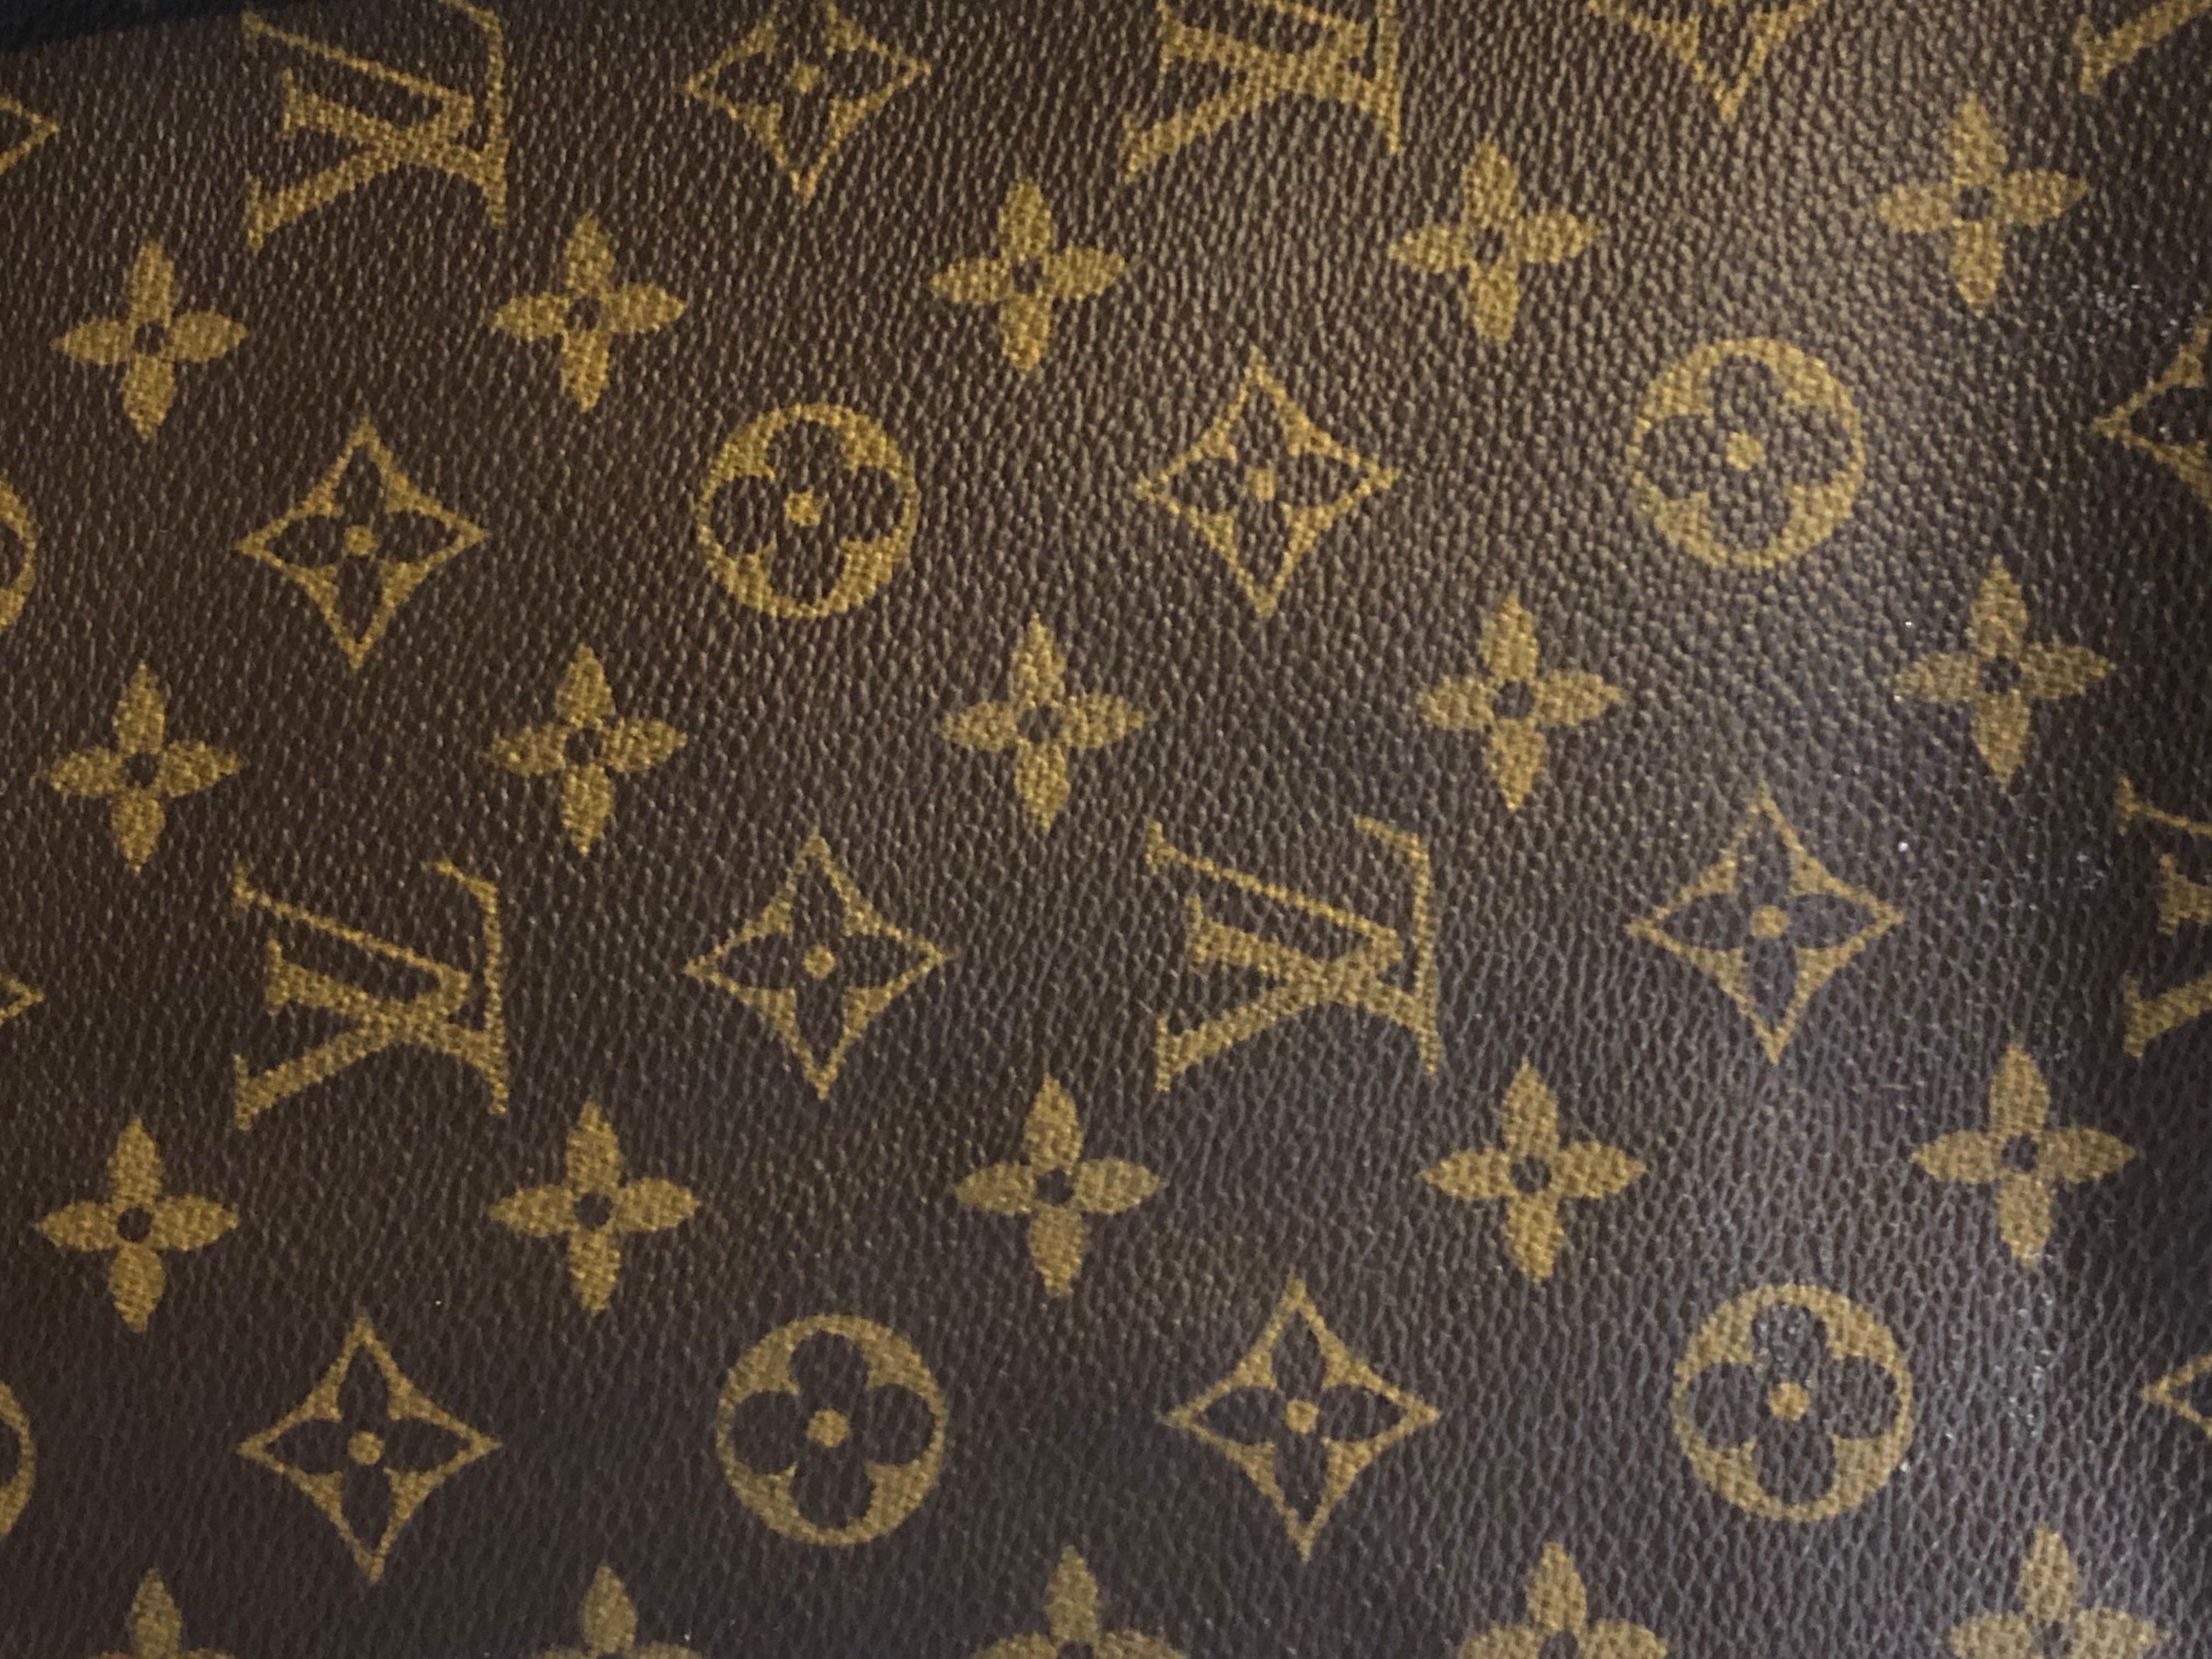 French Louis Vuitton Dog Carrier 40 Monogram Canvas Luggage Bag